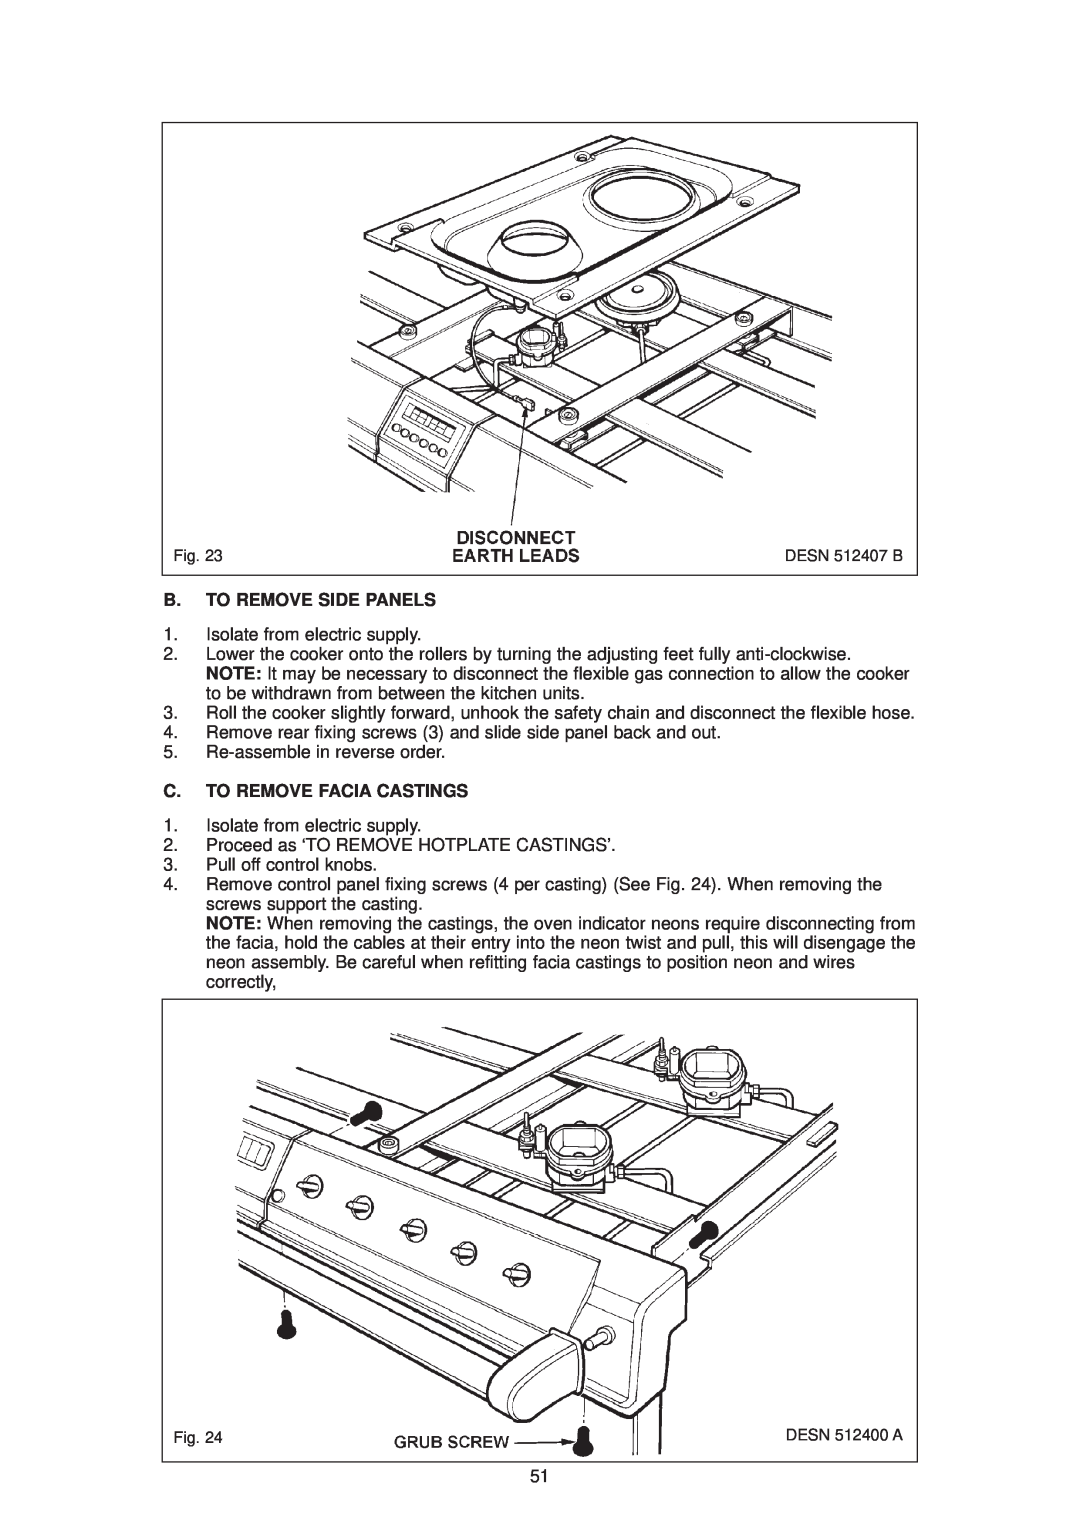 Aga Ranges DESN 512387 A owner manual B. To Remove Side Panels, C. To Remove Facia Castings, DESN 512407 B 